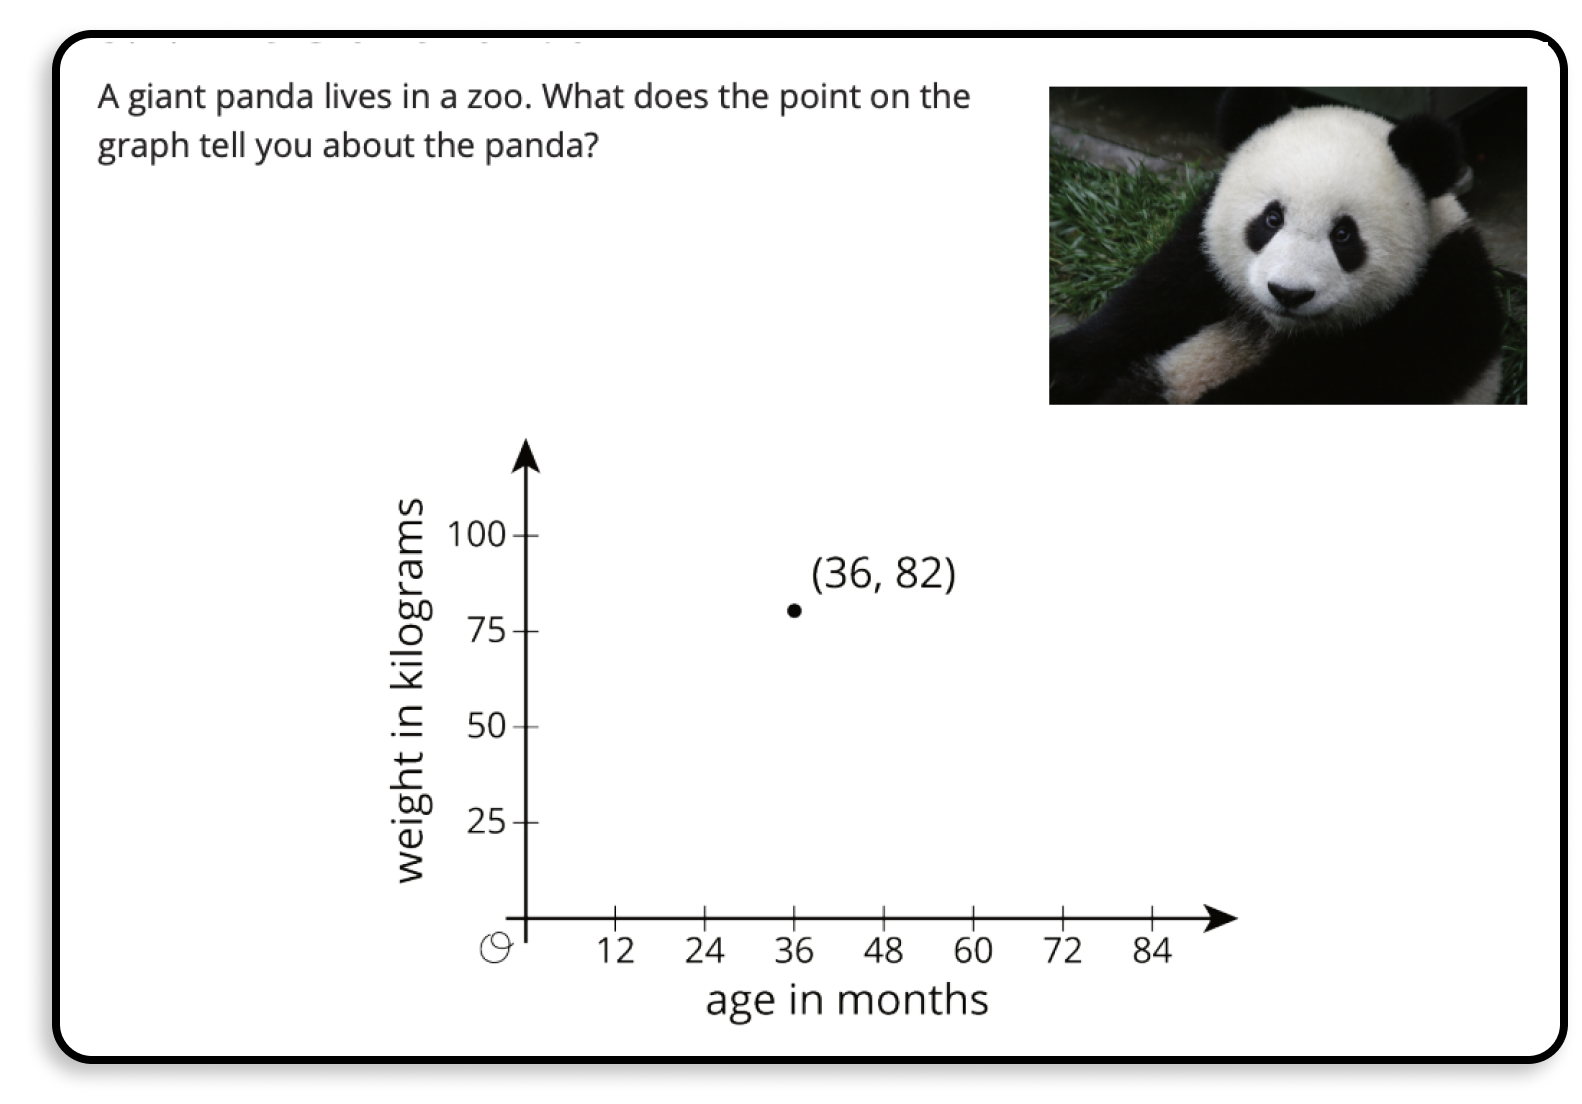 Asking a numerical question about an animal graph.